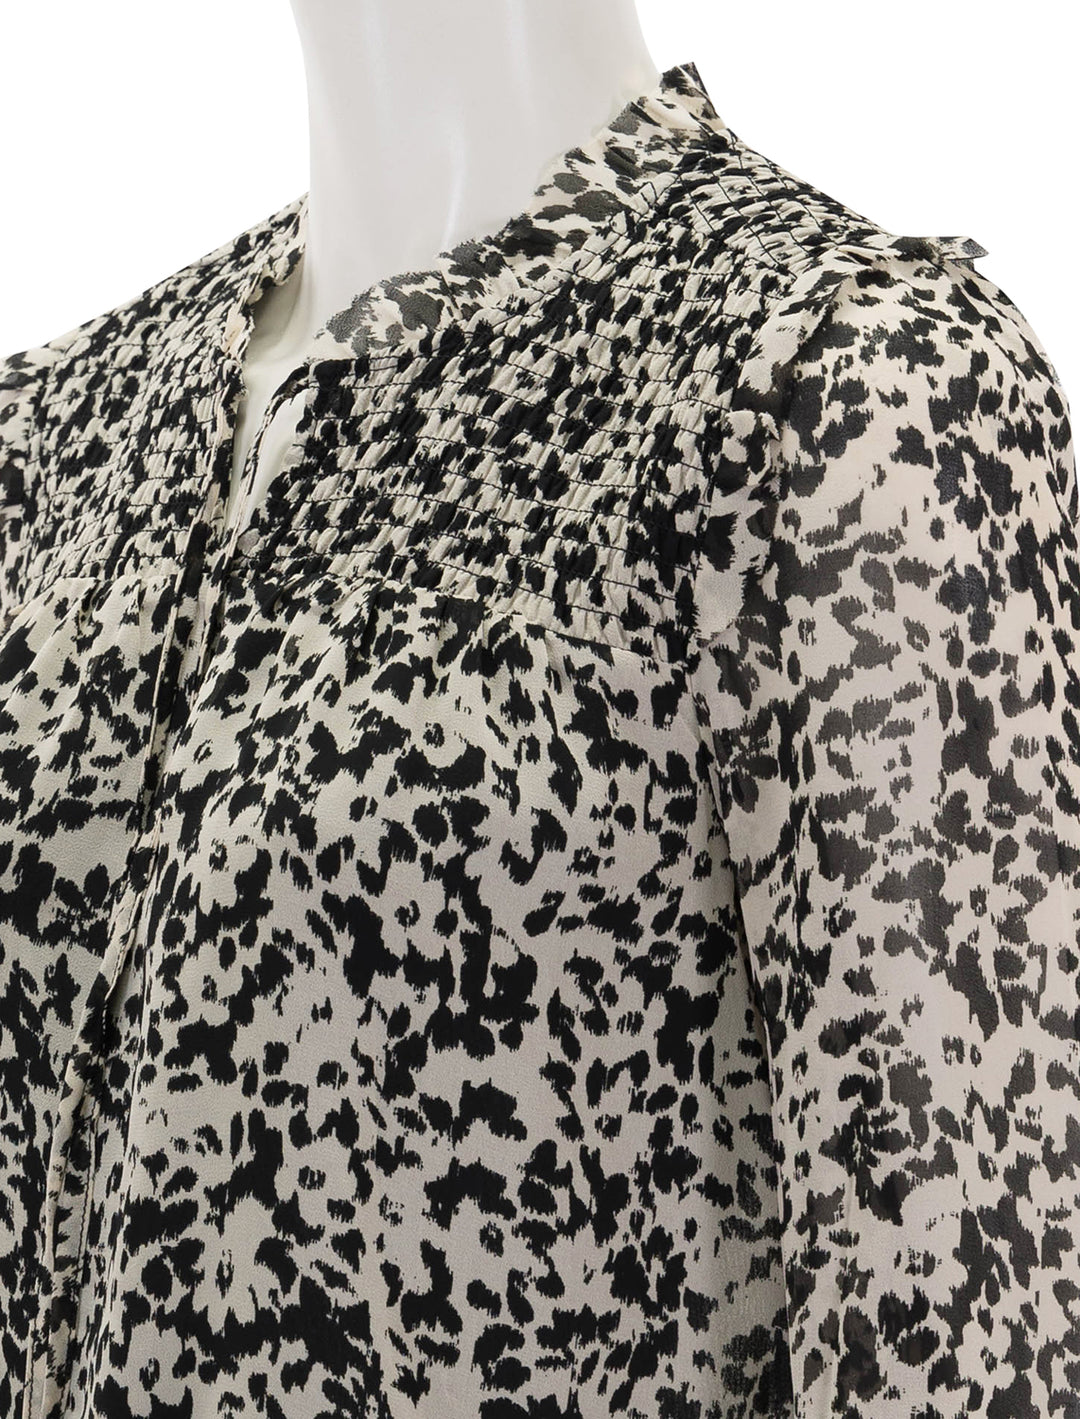 Close-up view of Steve Madden's drew top in black and ivory floral.